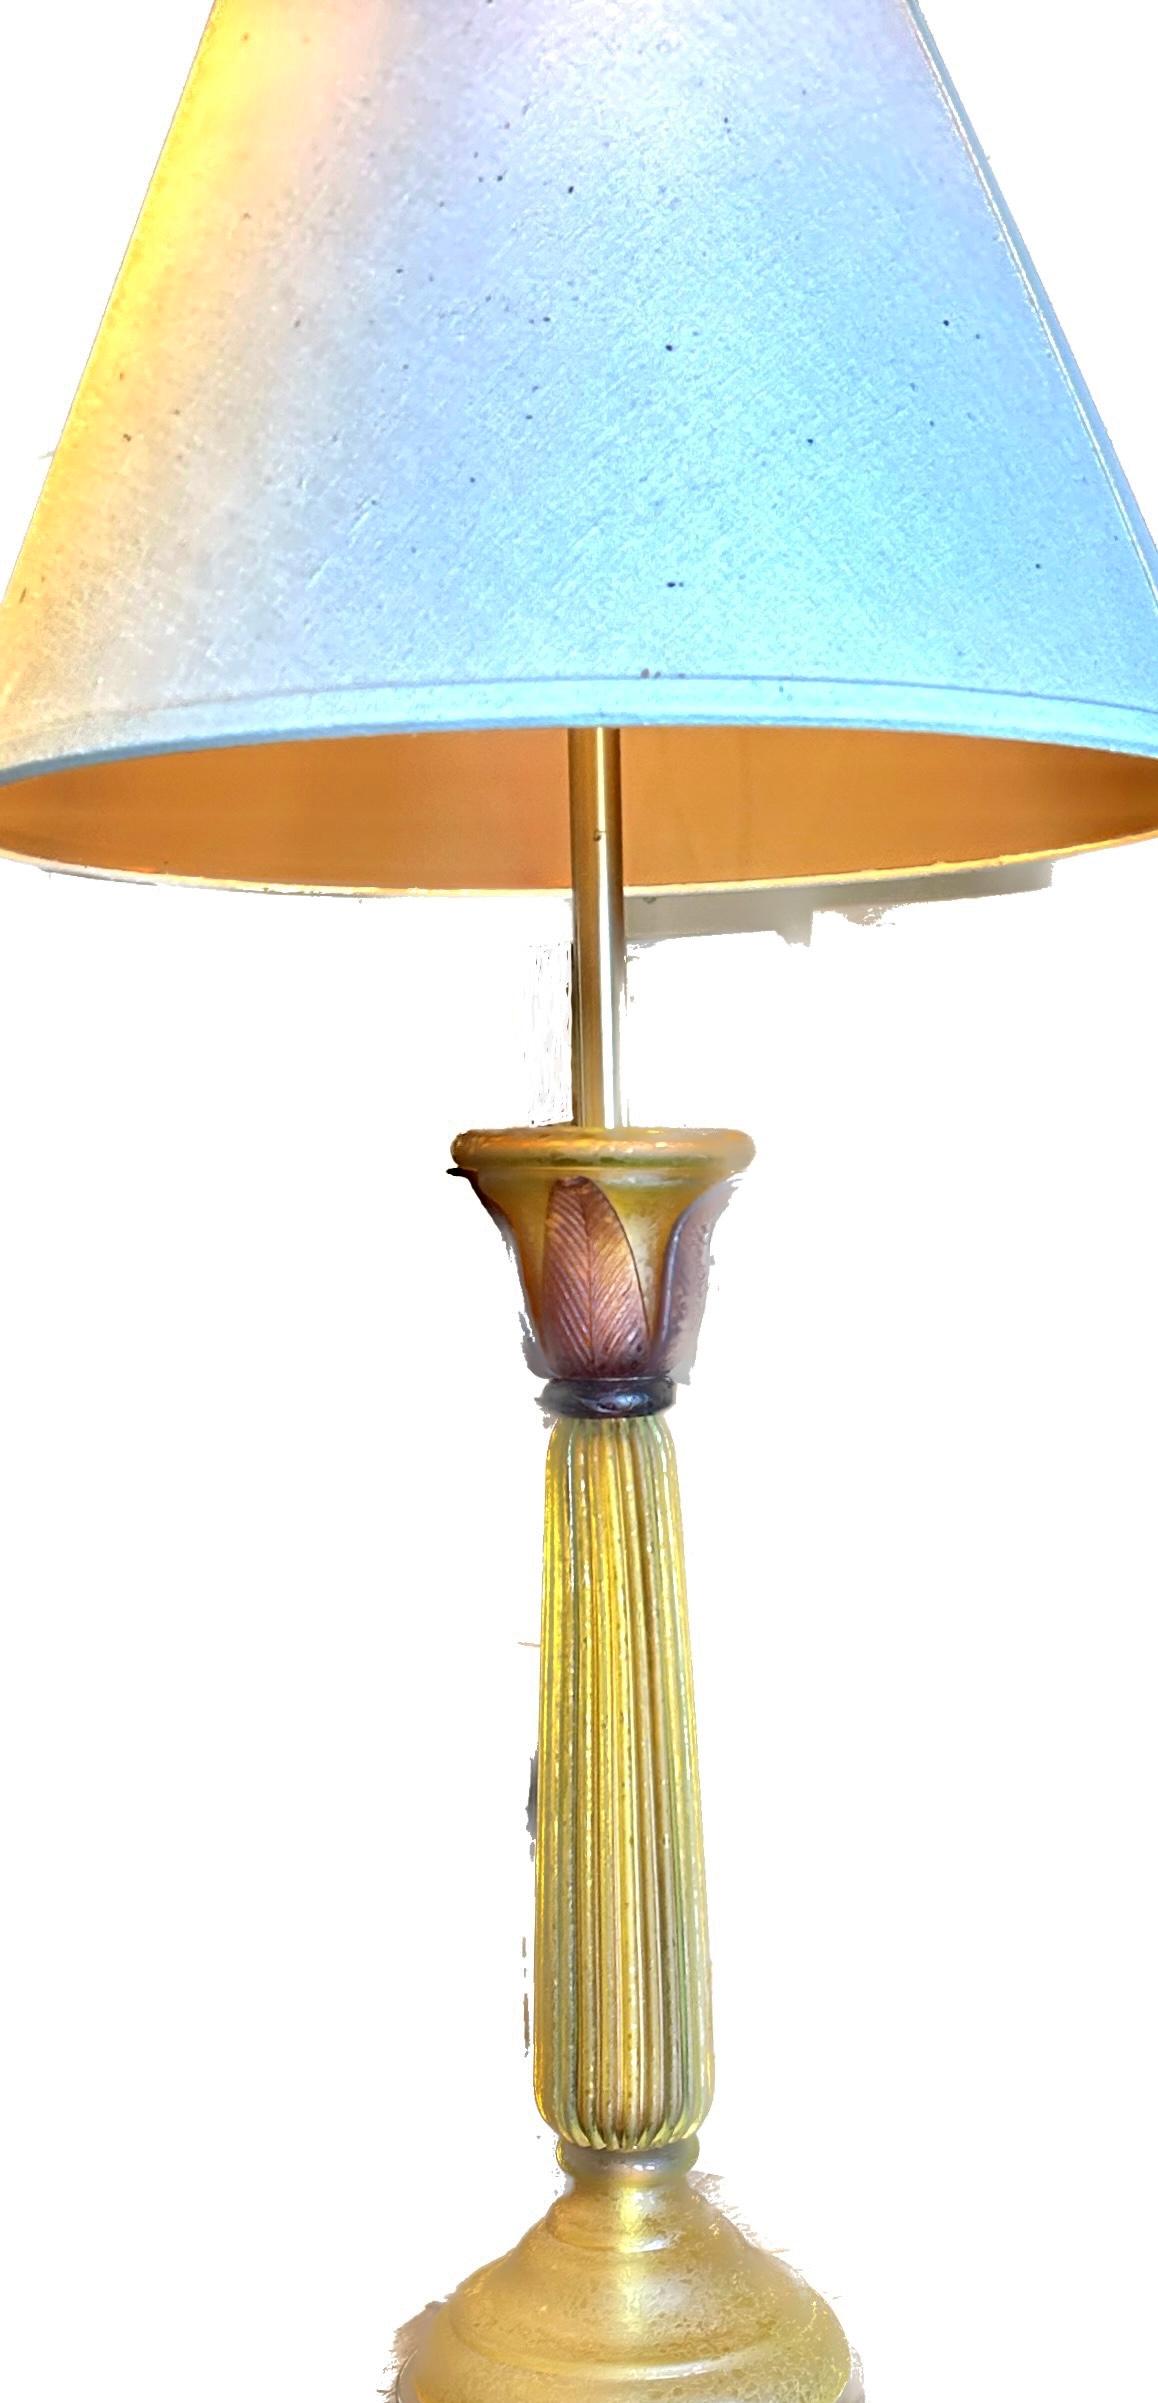 Made by Marbro Lamp co.  Beautifully made in luminescent amber satin glass with accent darker petals.  22” to the glass top.  Shade not included.
